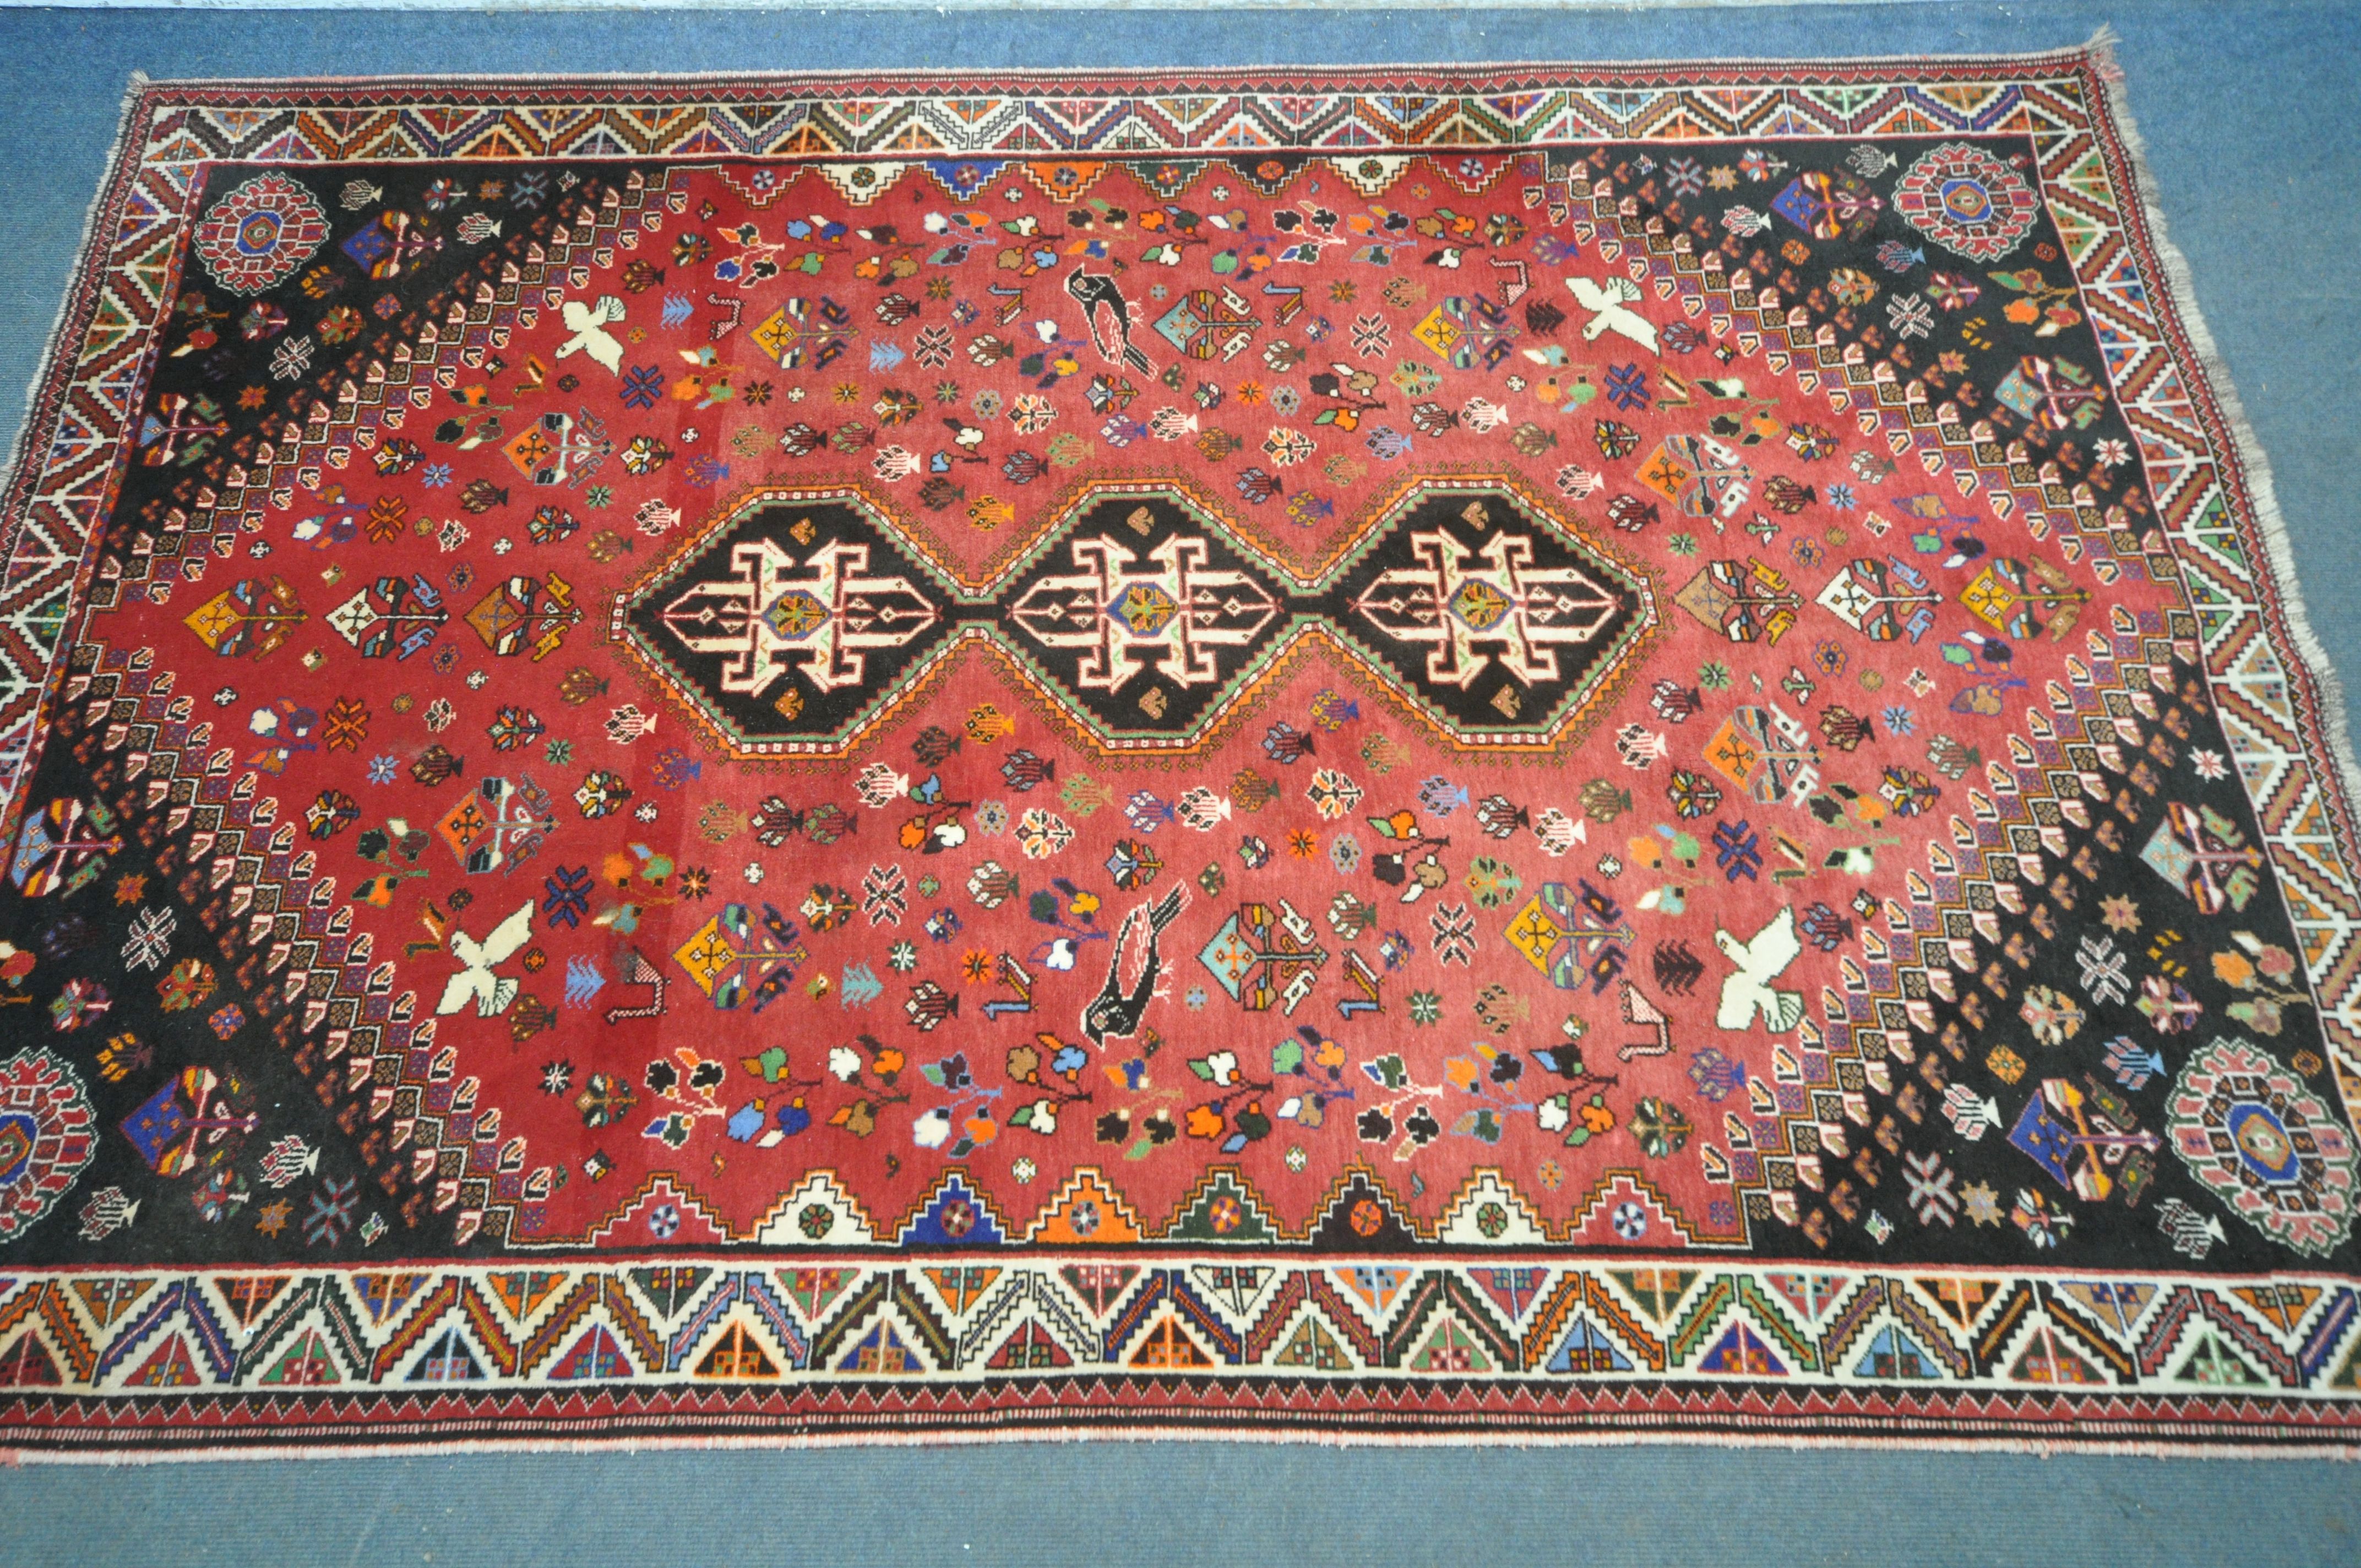 A WOOLLEN RED GROUND RUG, with a repeating pattern of birds, three central medallions, black